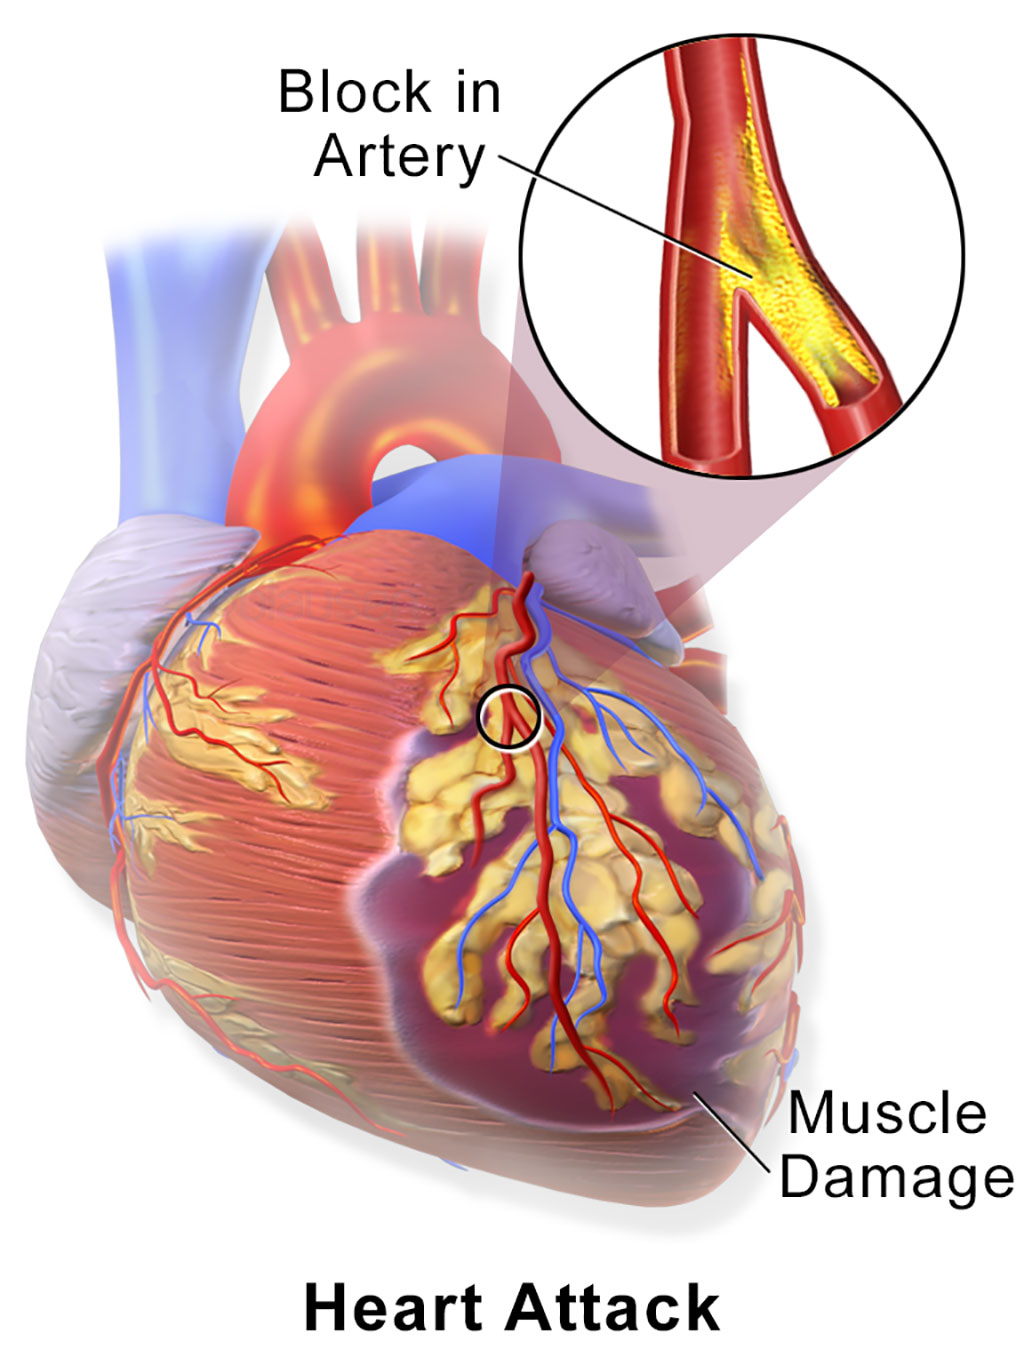 Image: A myocardial infarction (MI), commonly known as a heart attack, occurs when blood flow decreases or stops to a part of the heart, causing damage to the heart muscle (Photo courtesy of Wikimedia Commons)